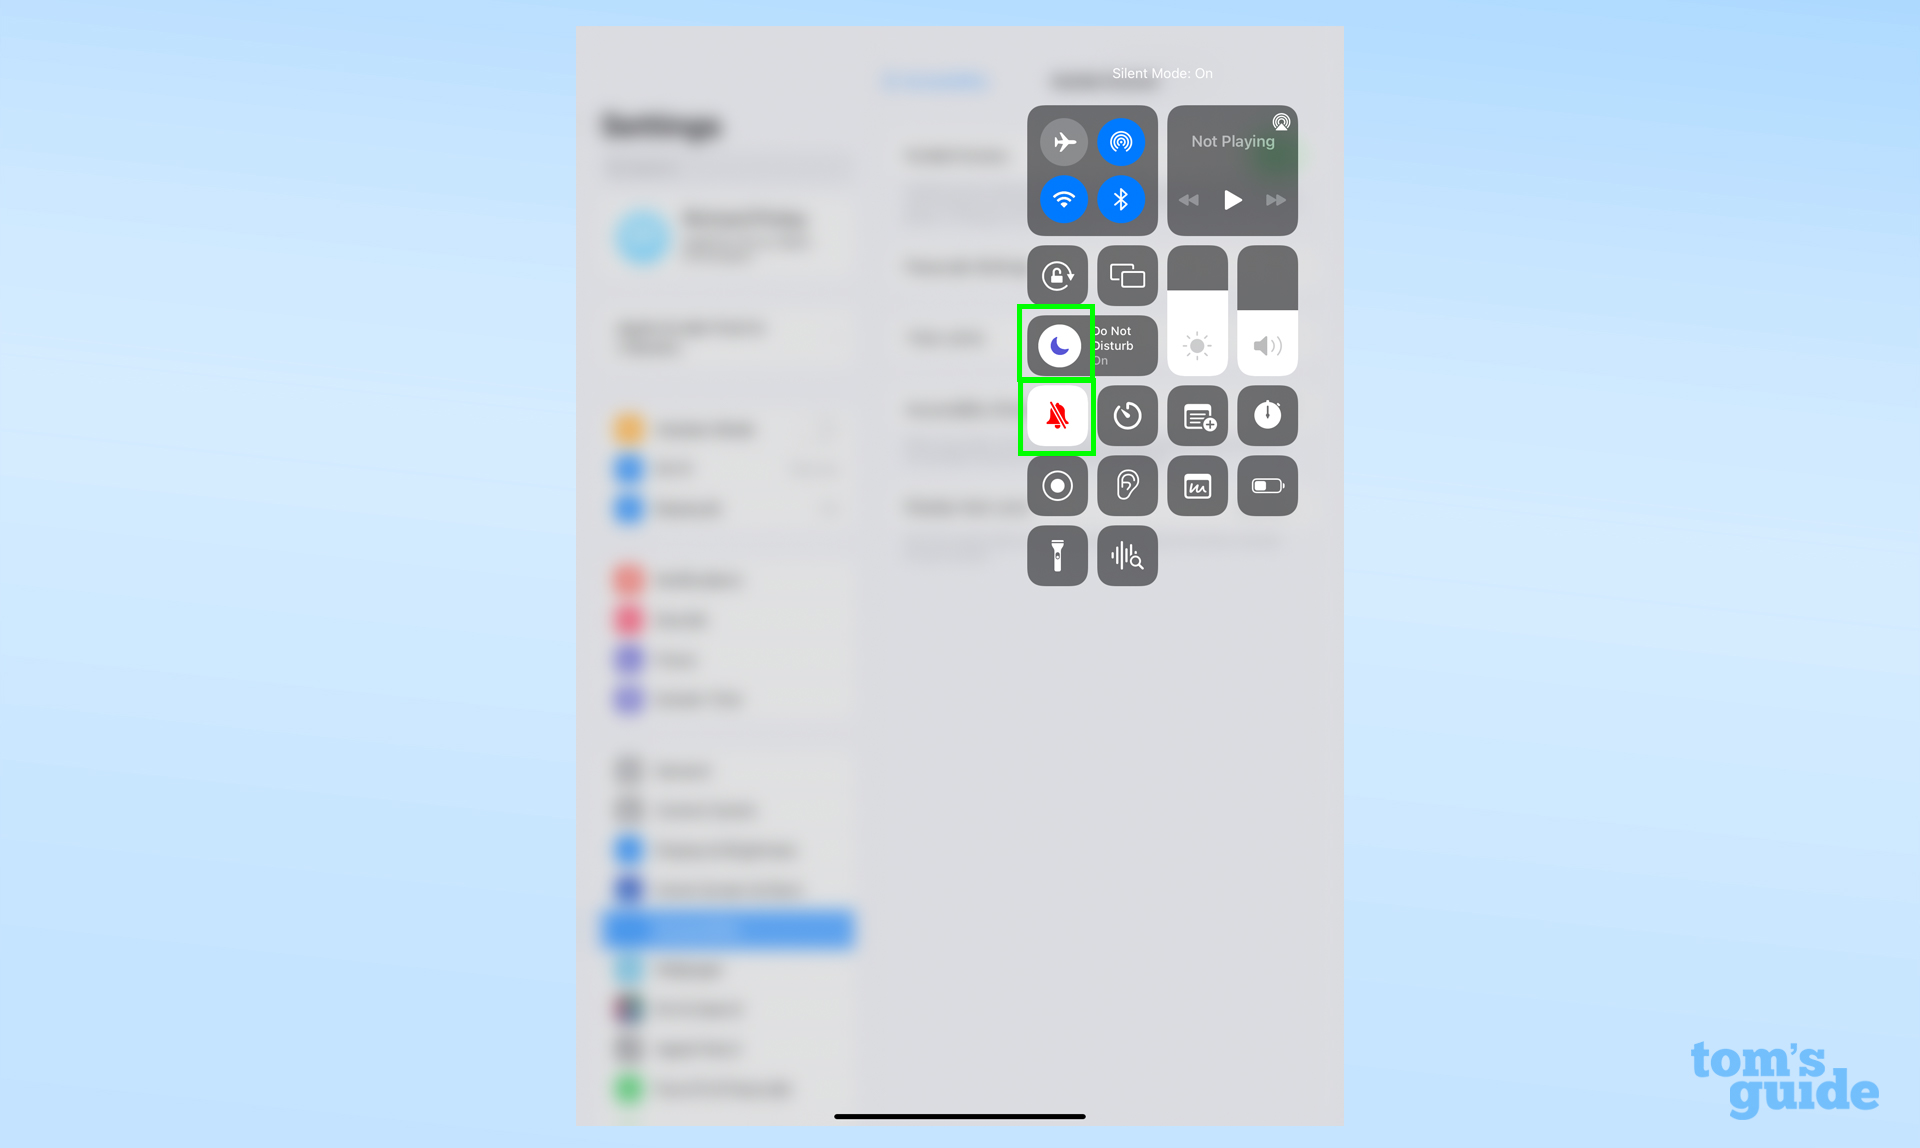 A screenshot showing the iPadOS Control Center with Do Not Disturb and Silent Mode buttons highlighted